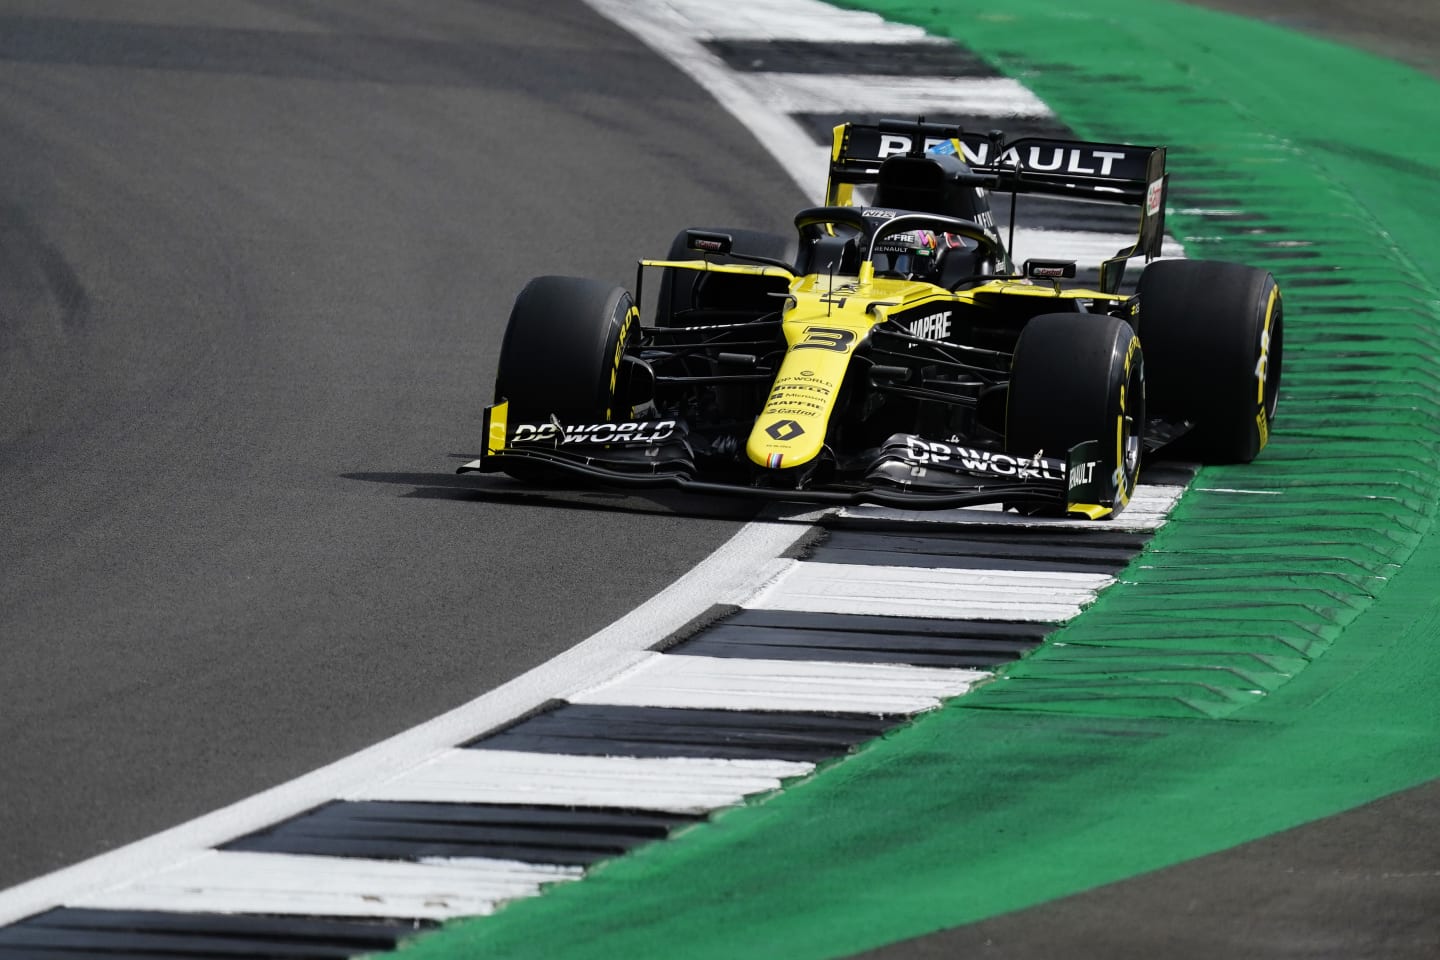 NORTHAMPTON, ENGLAND - AUGUST 08: Daniel Ricciardo of Australia driving the (3) Renault Sport Formula One Team RS20 on track during qualifying for the F1 70th Anniversary Grand Prix at Silverstone on August 08, 2020 in Northampton, England. (Photo by Will Oliver/Pool via Getty Images)